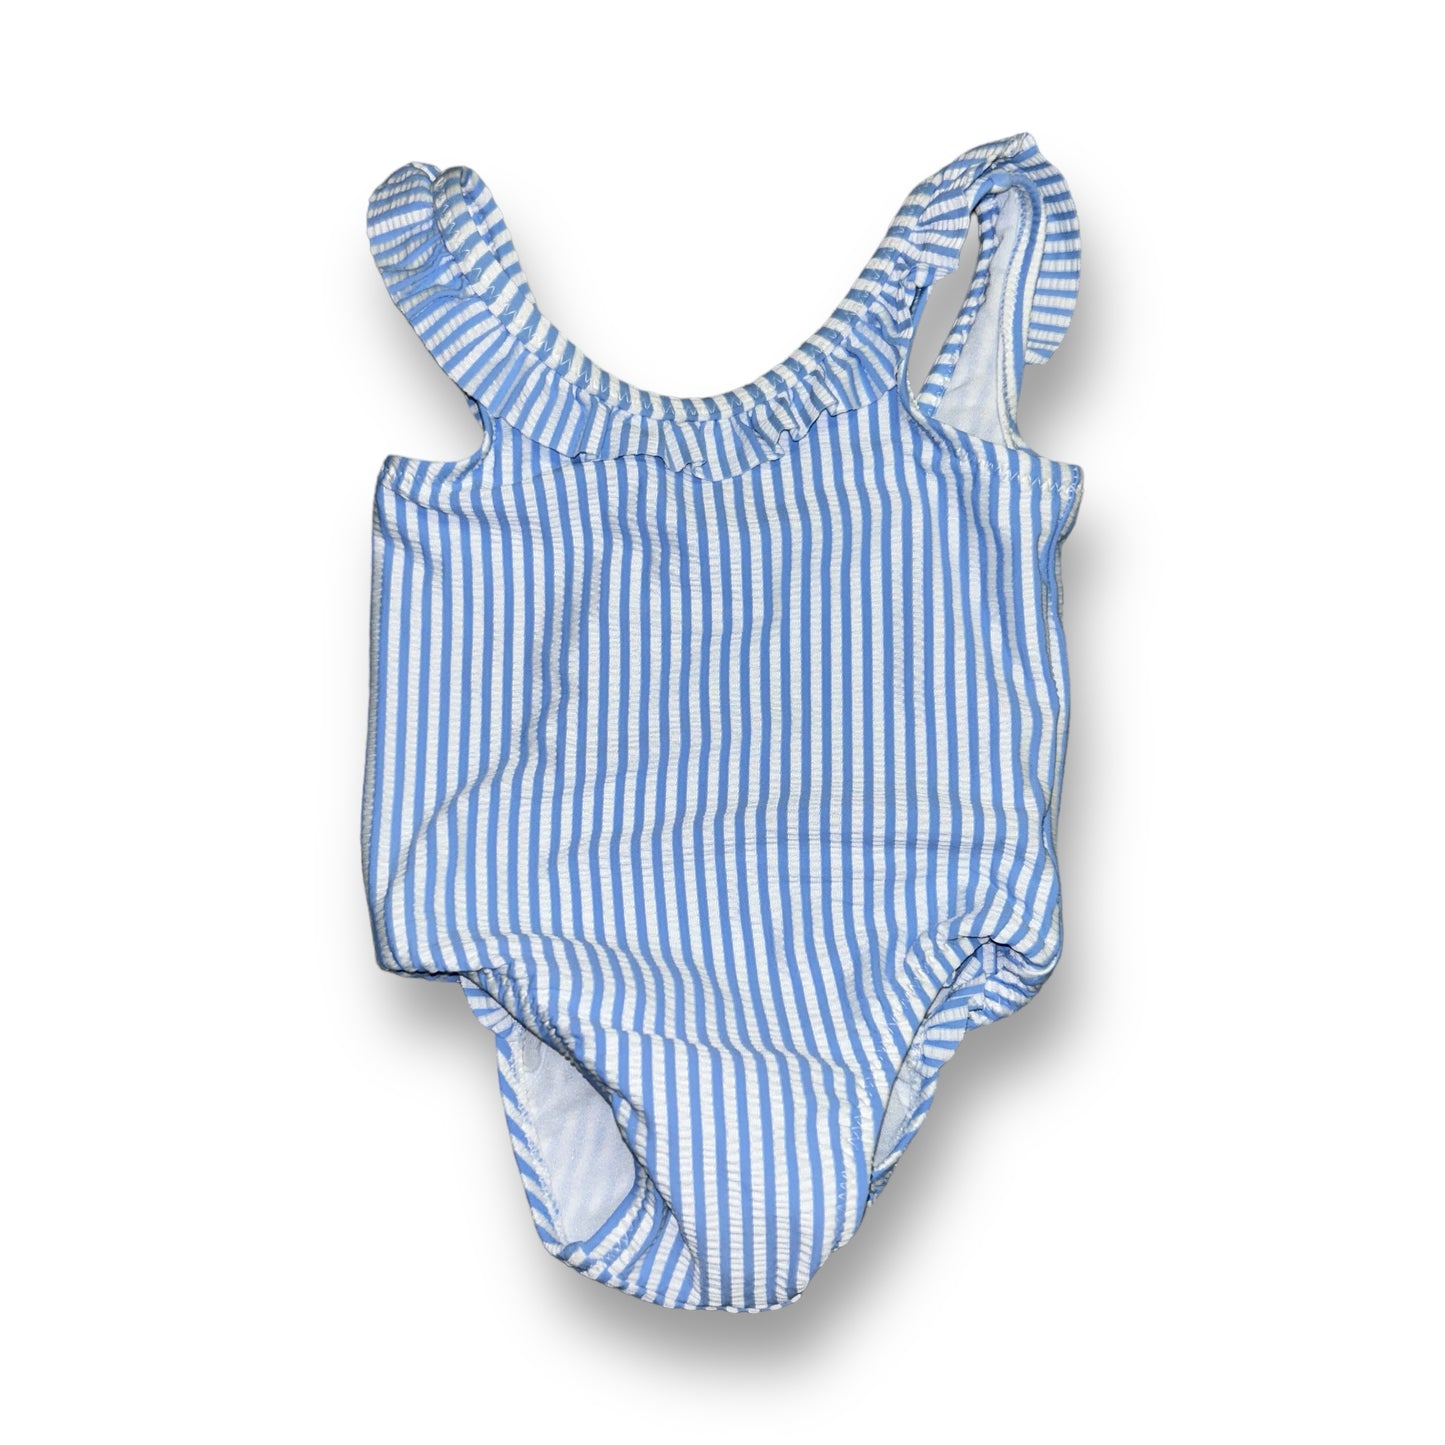 Girls Old Navy Size 3-6 Months Blue & White Striped Bathing Suit